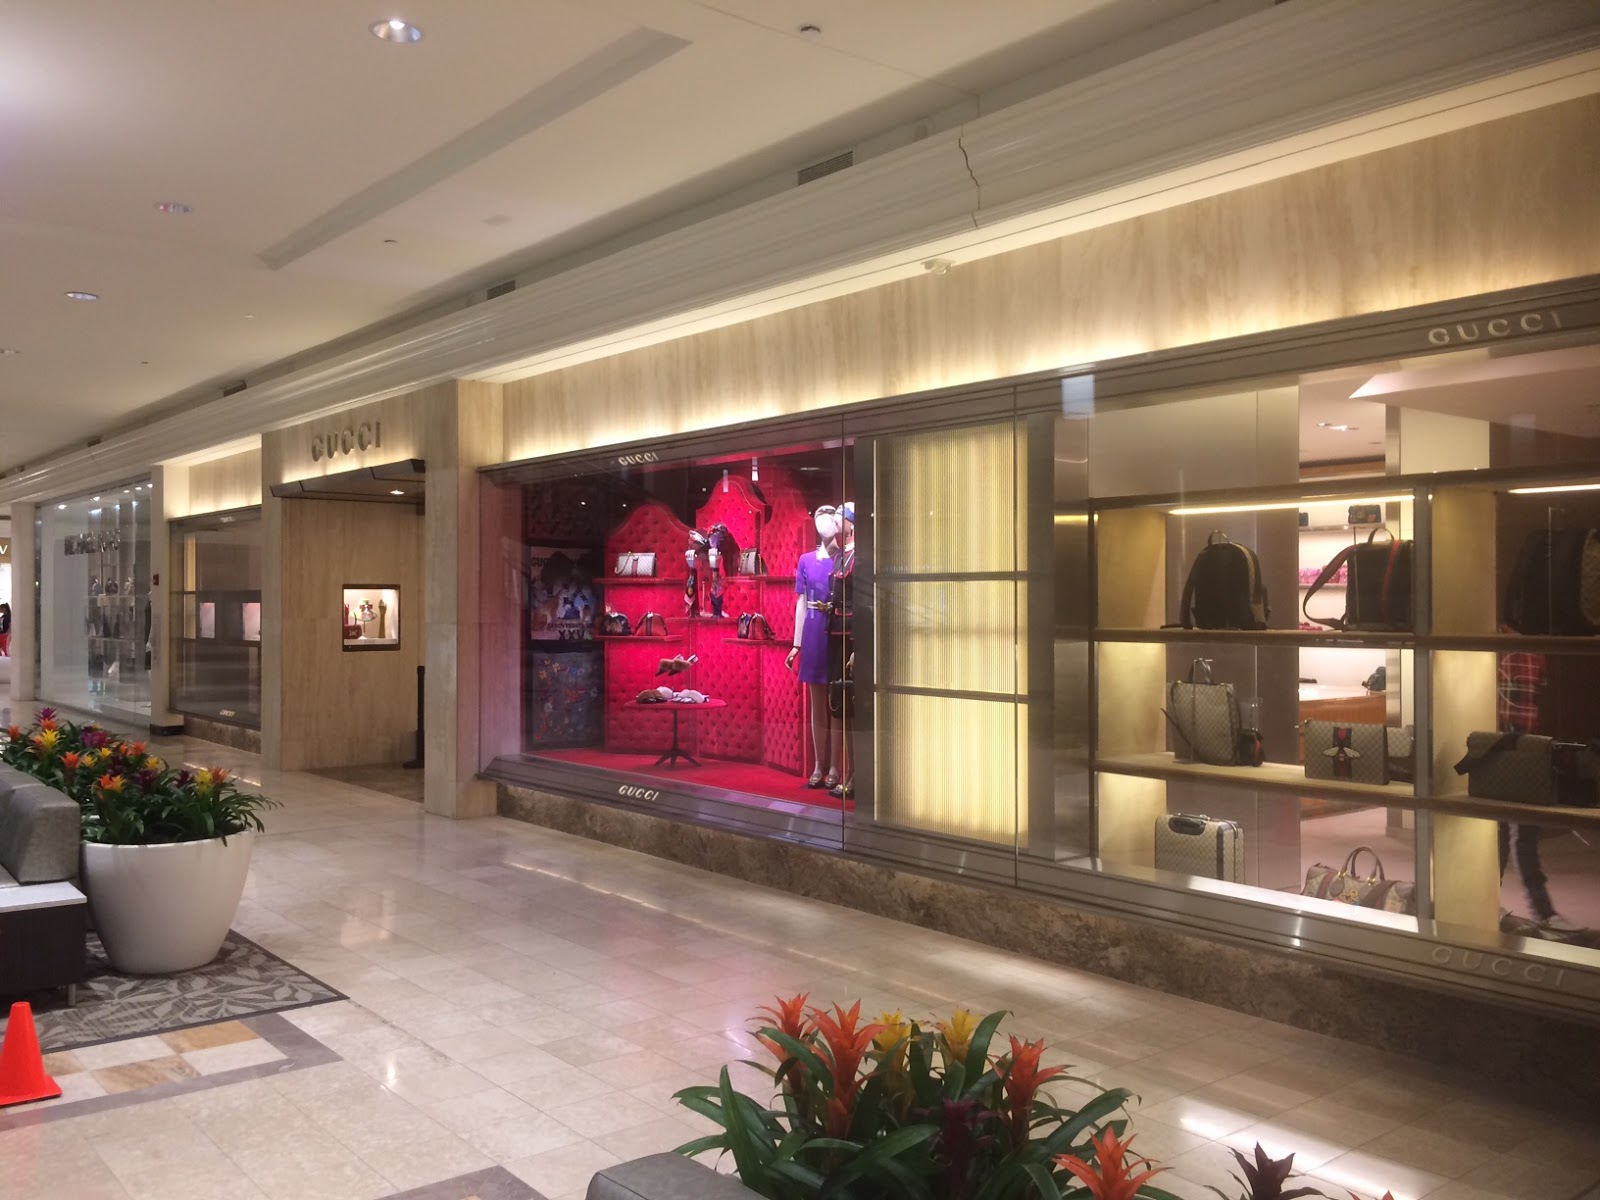 Tomorrow's News Today - Atlanta: [EXCLUSIVE] Gucci to Get More Grand at  Phipps Plaza as Time Runs Out For Hublot